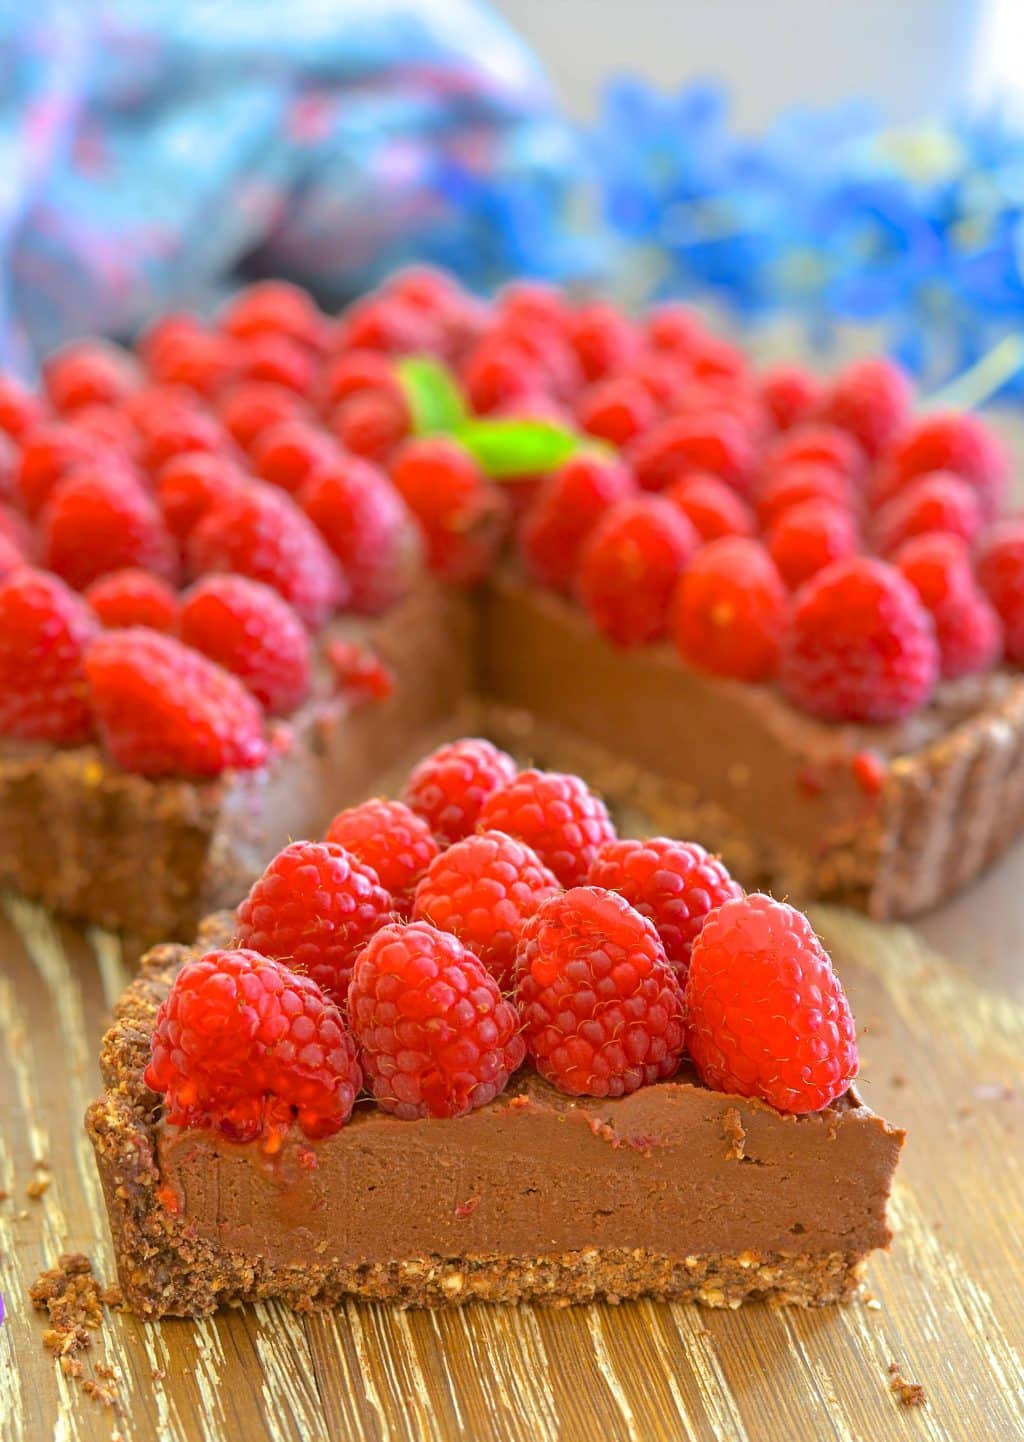 Want a dessert that looks and tastes decadent but is secretly quite good for you? I've got you covered with my Healthy Fudgy Chocolate Raspberry Tart